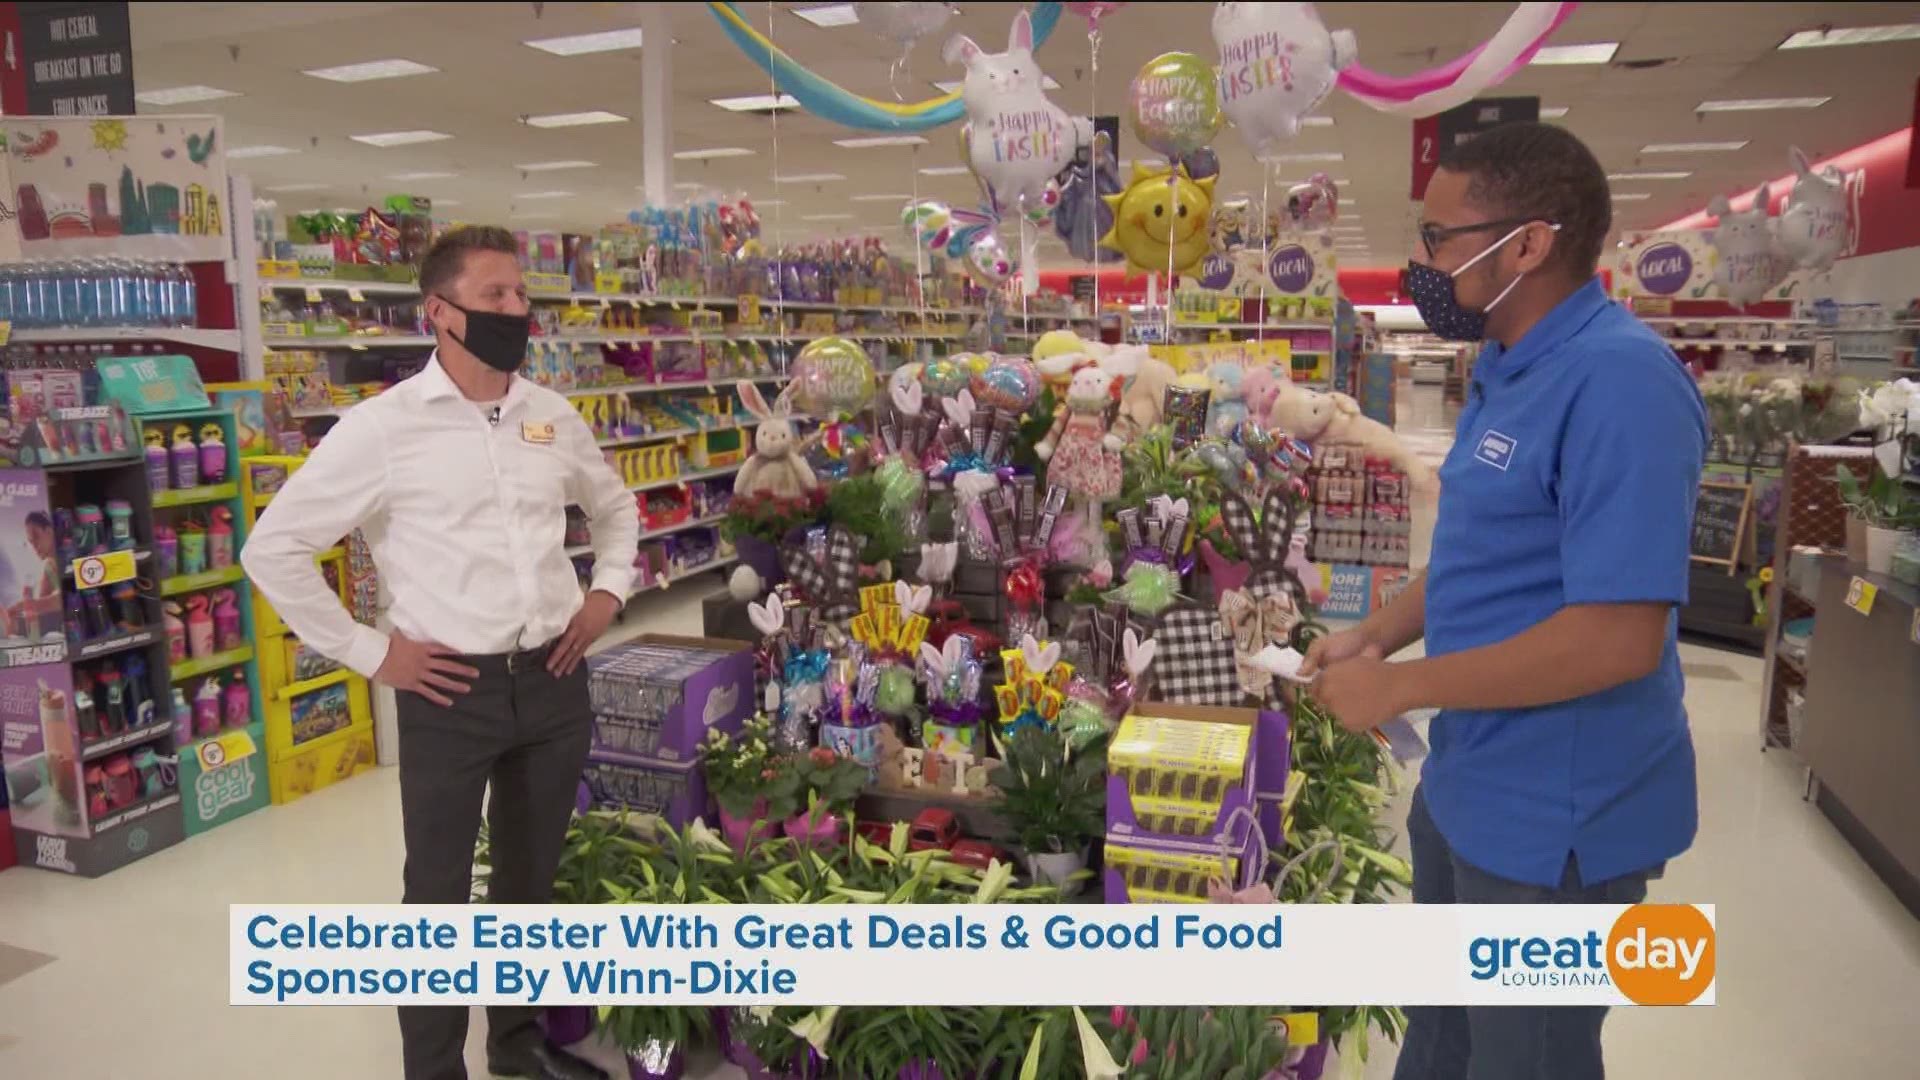 Winn-Dixie is a one-stop shop for Easter. Let Winn-Dixie make Easter meals easy and delicious for your family.